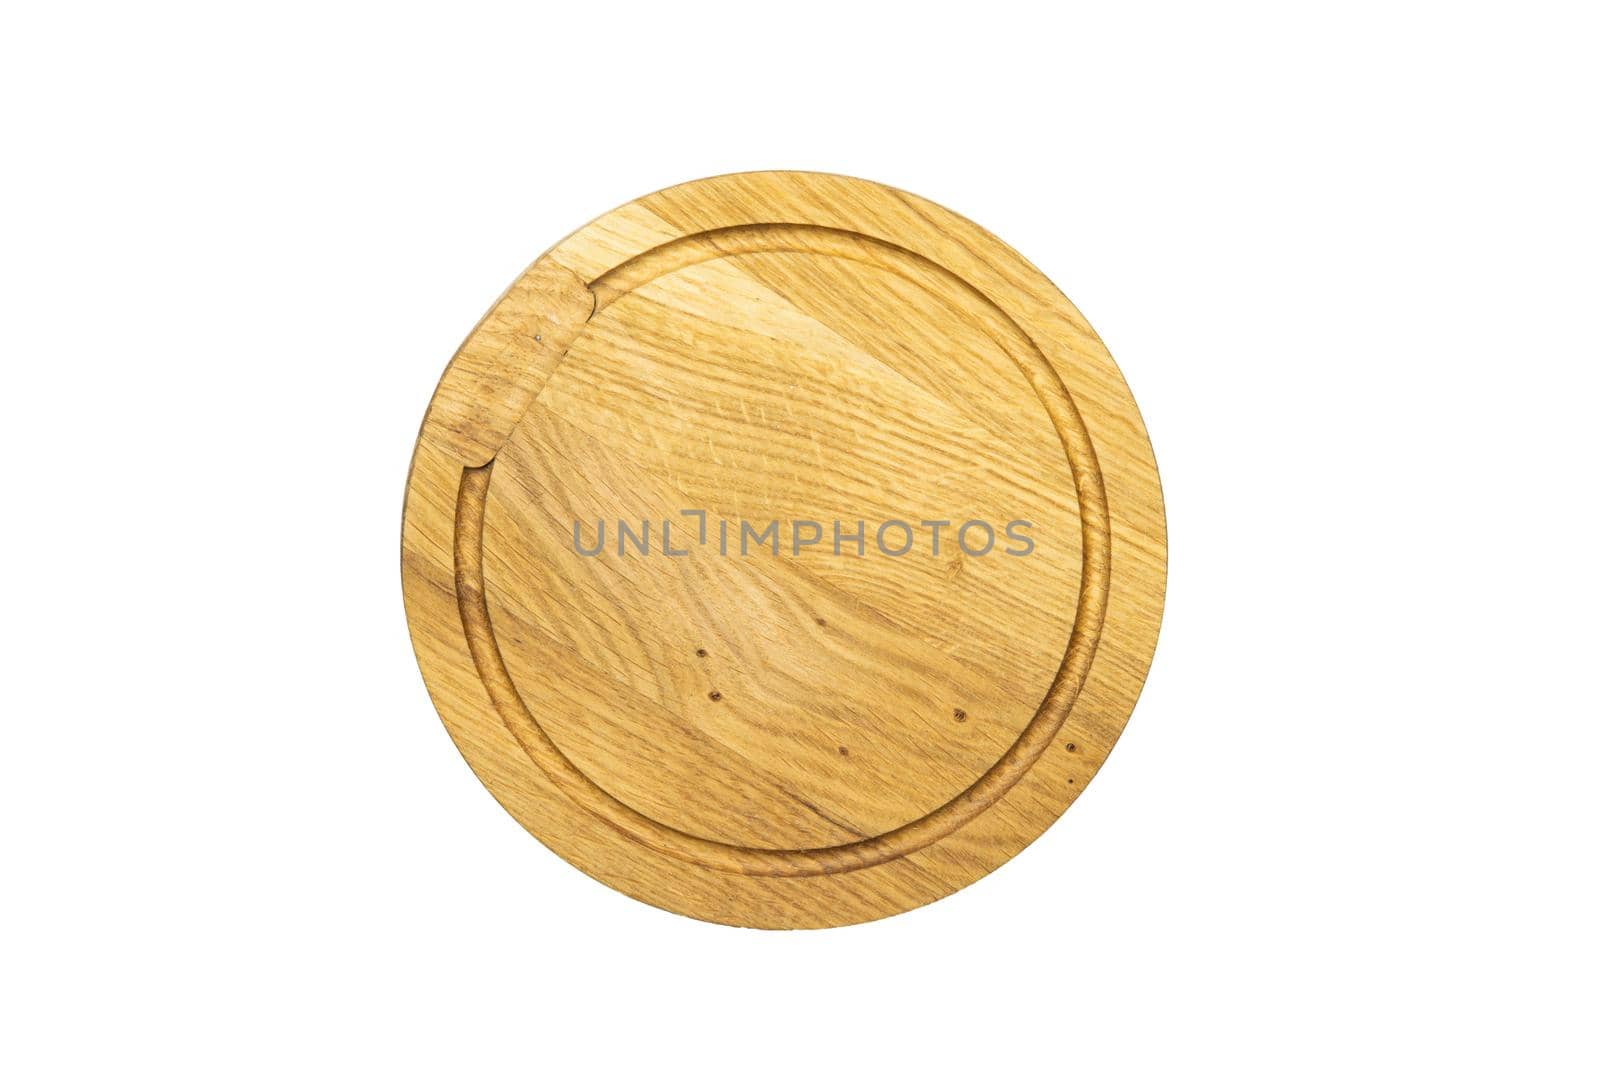 Wooden tray cutting board isolated on white background mock up by katrinaera